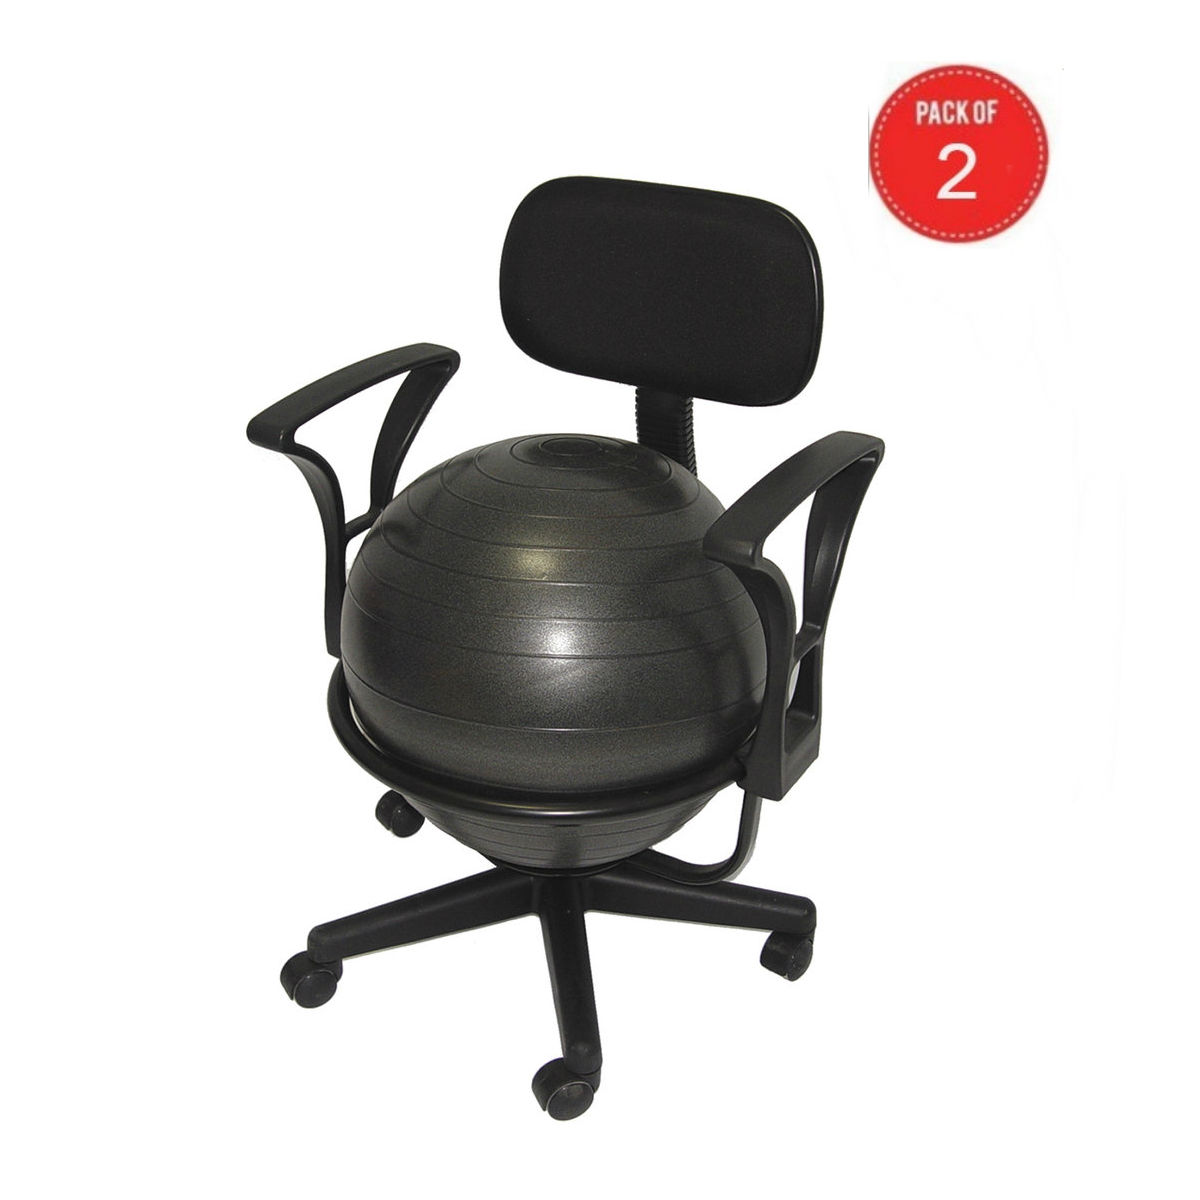 Aeromats Deluxe Fitness Ball Chair in Black (Pack of 2)